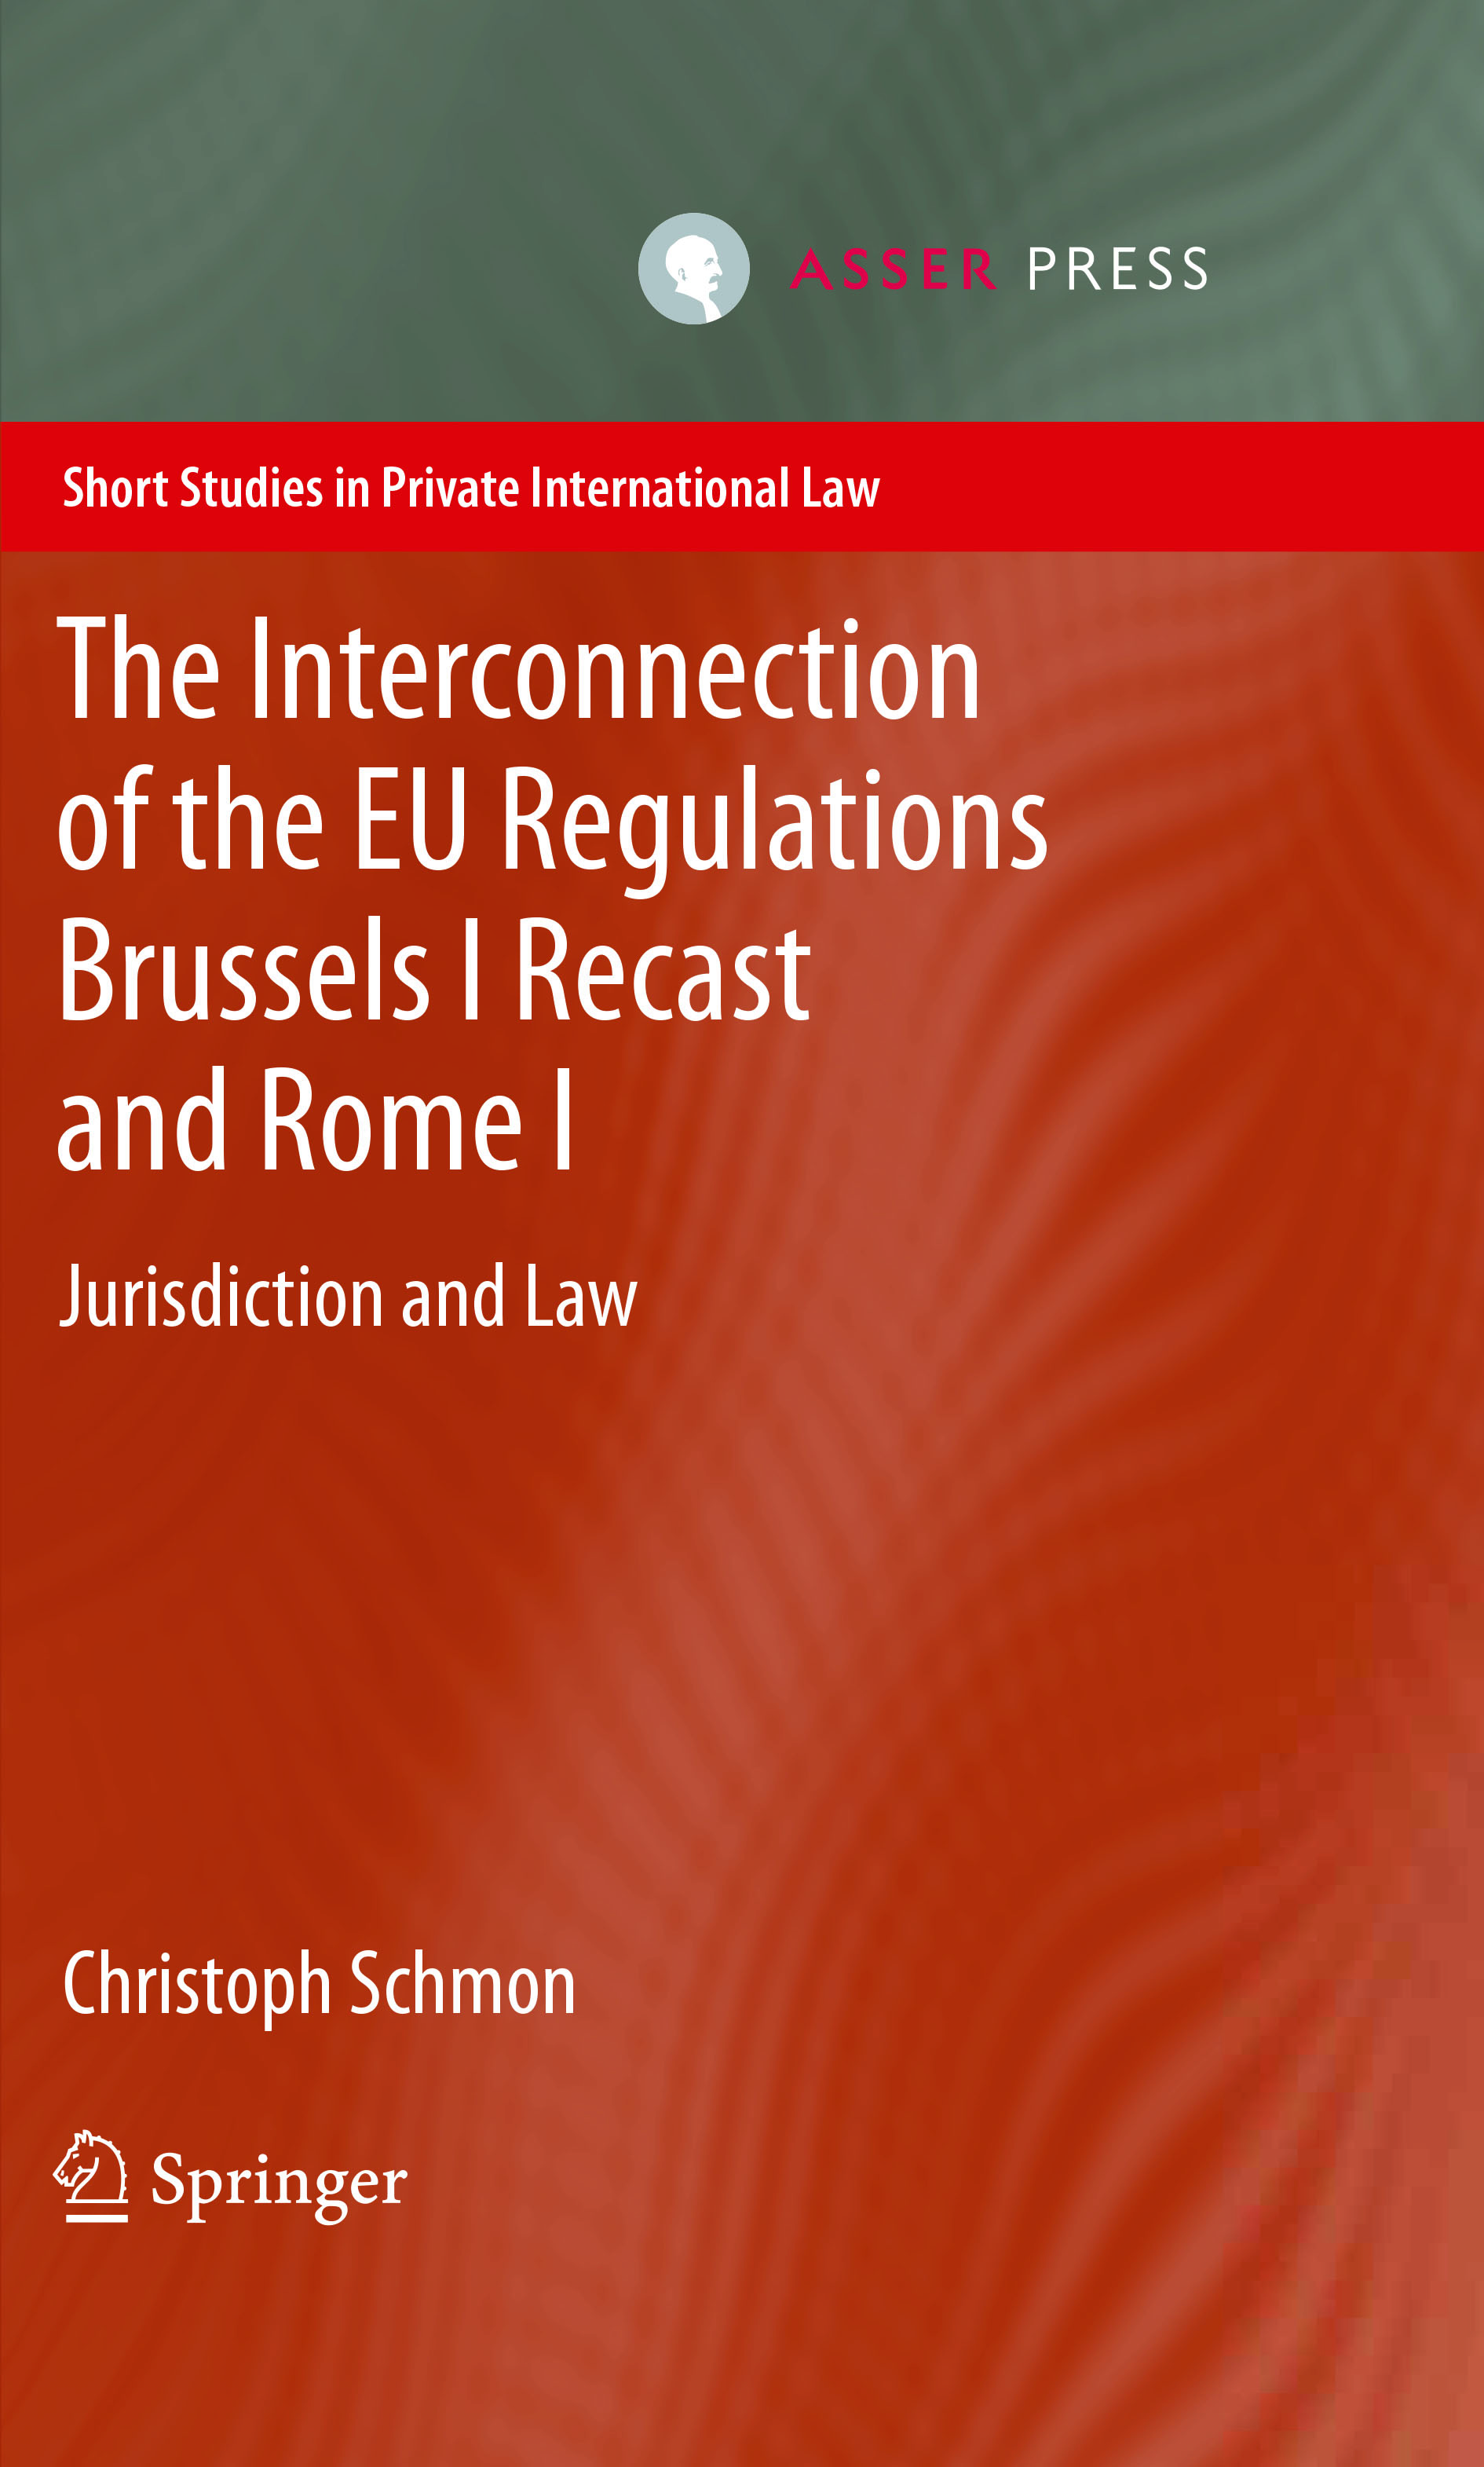 The Interconnection of the EU Regulations Brussels I Recast and Rome I - Jurisdiction and Law